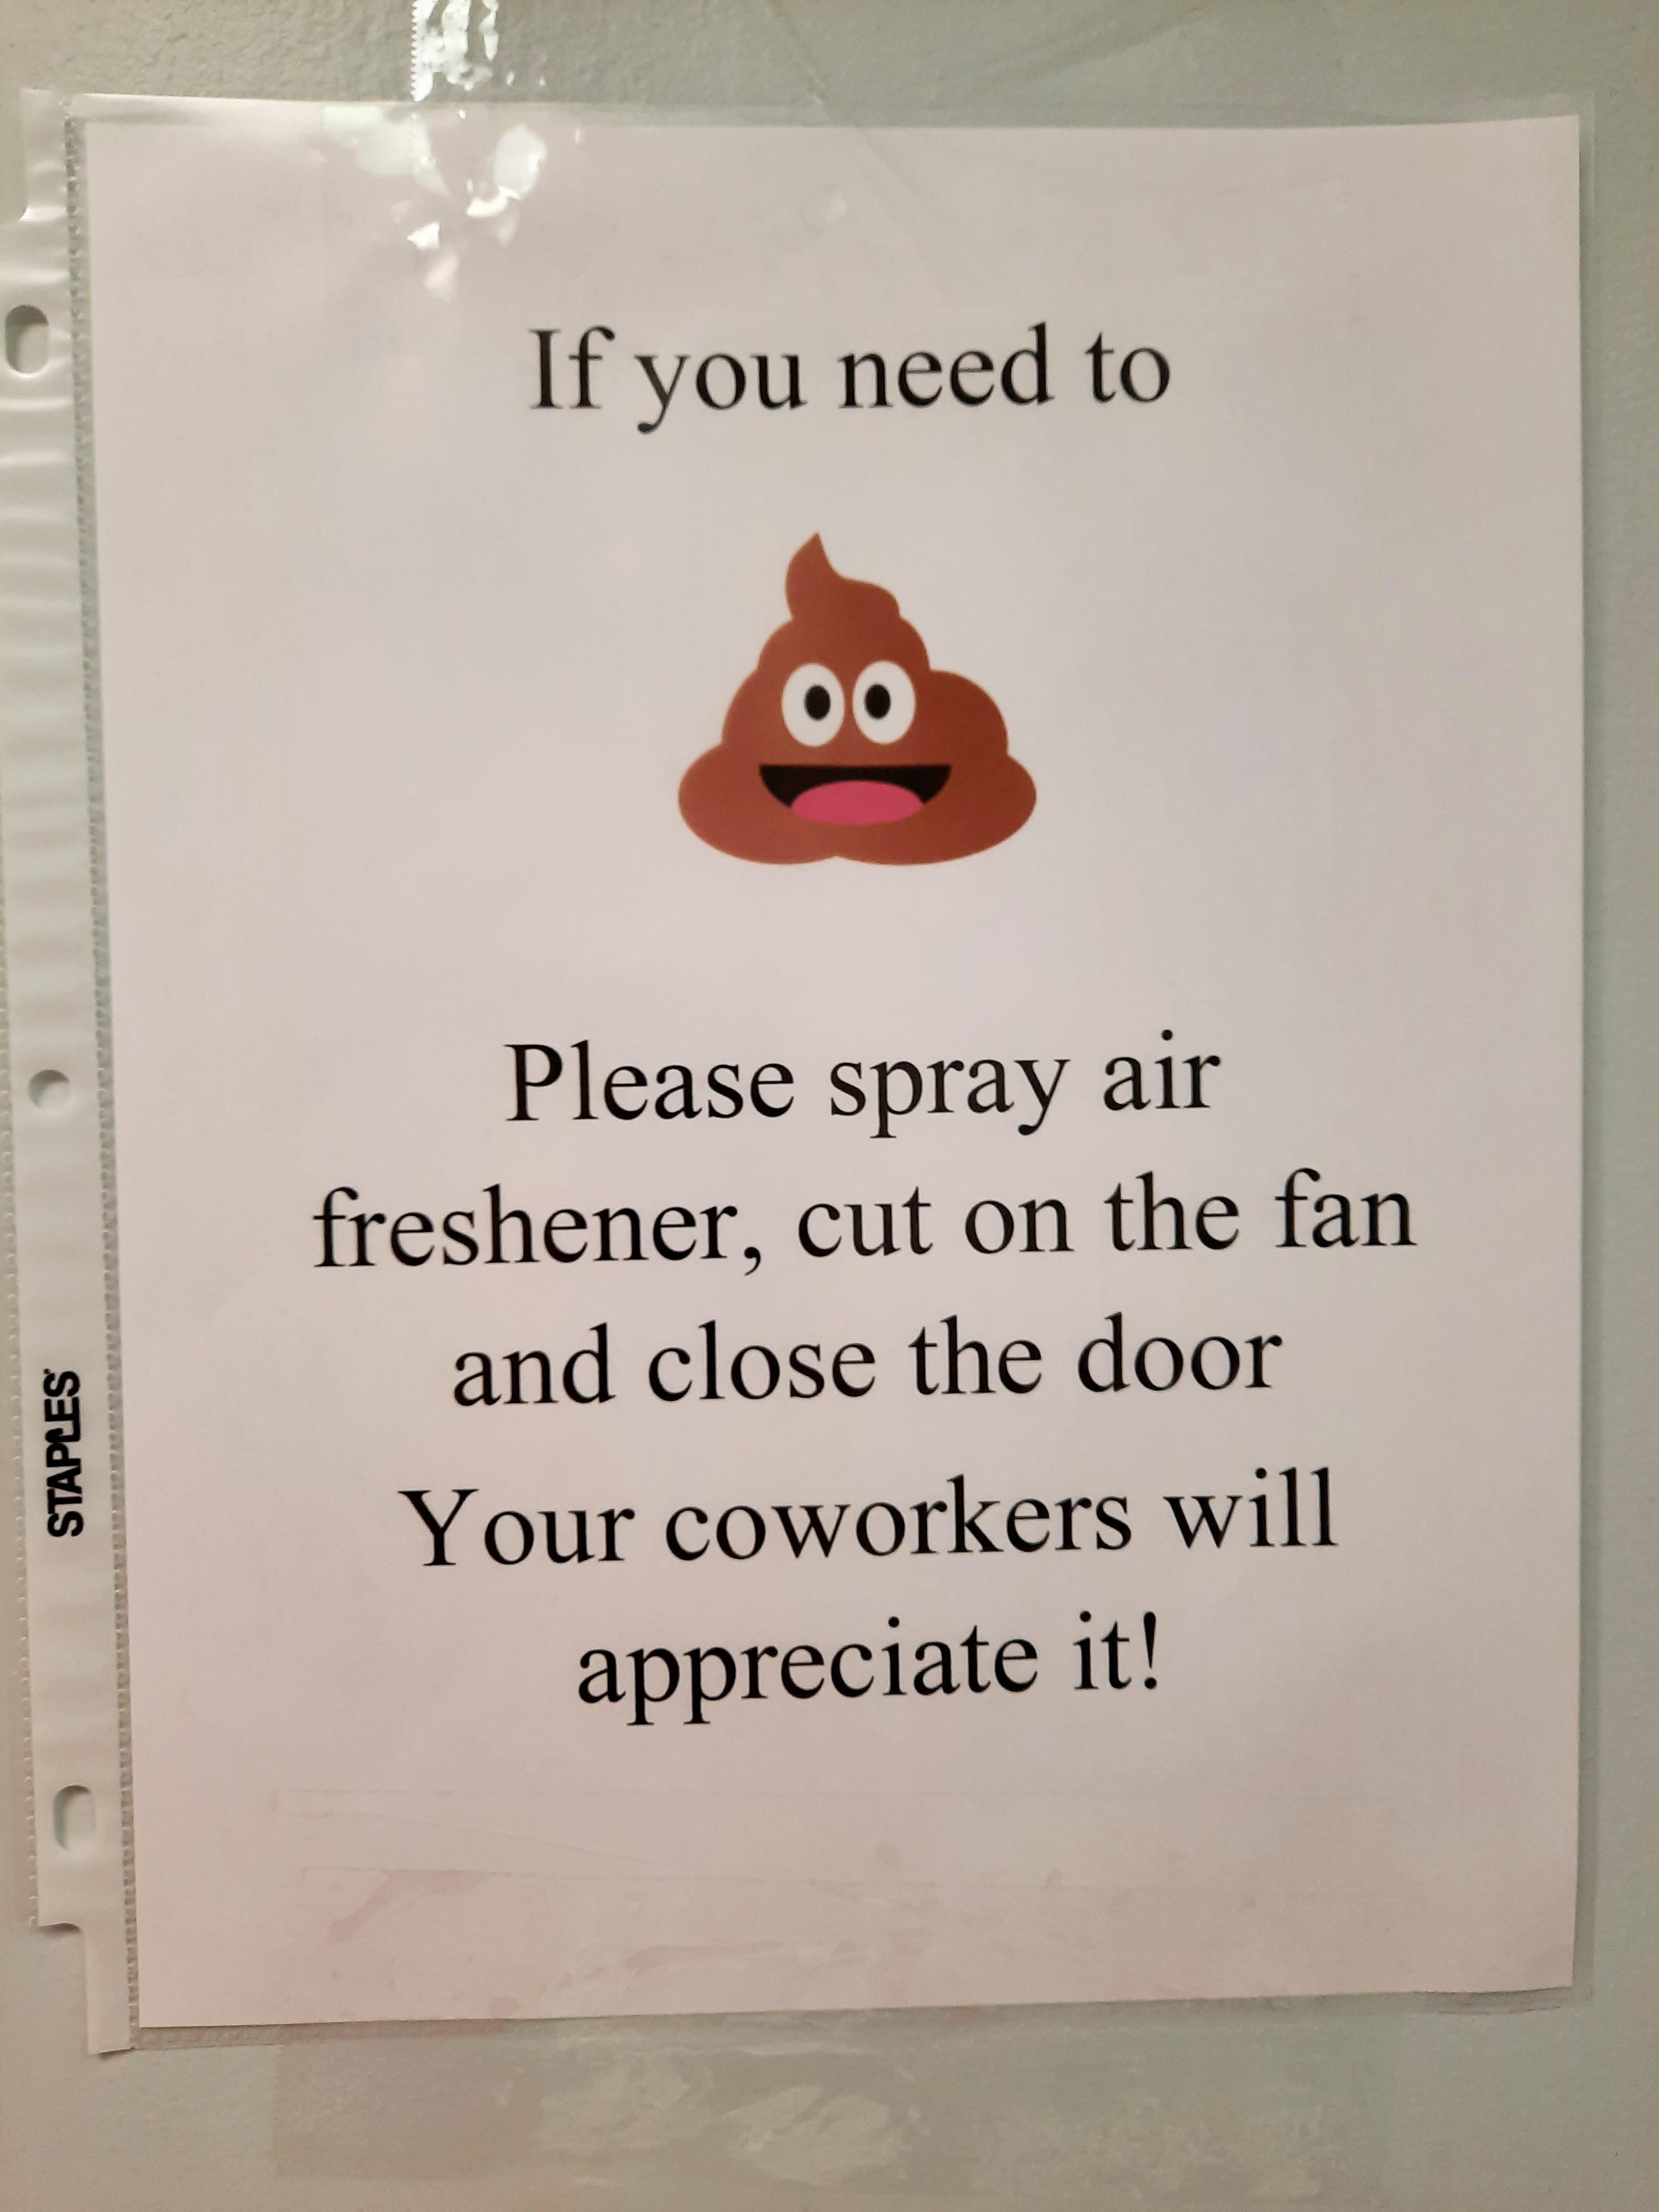 This sign we had to put up at work